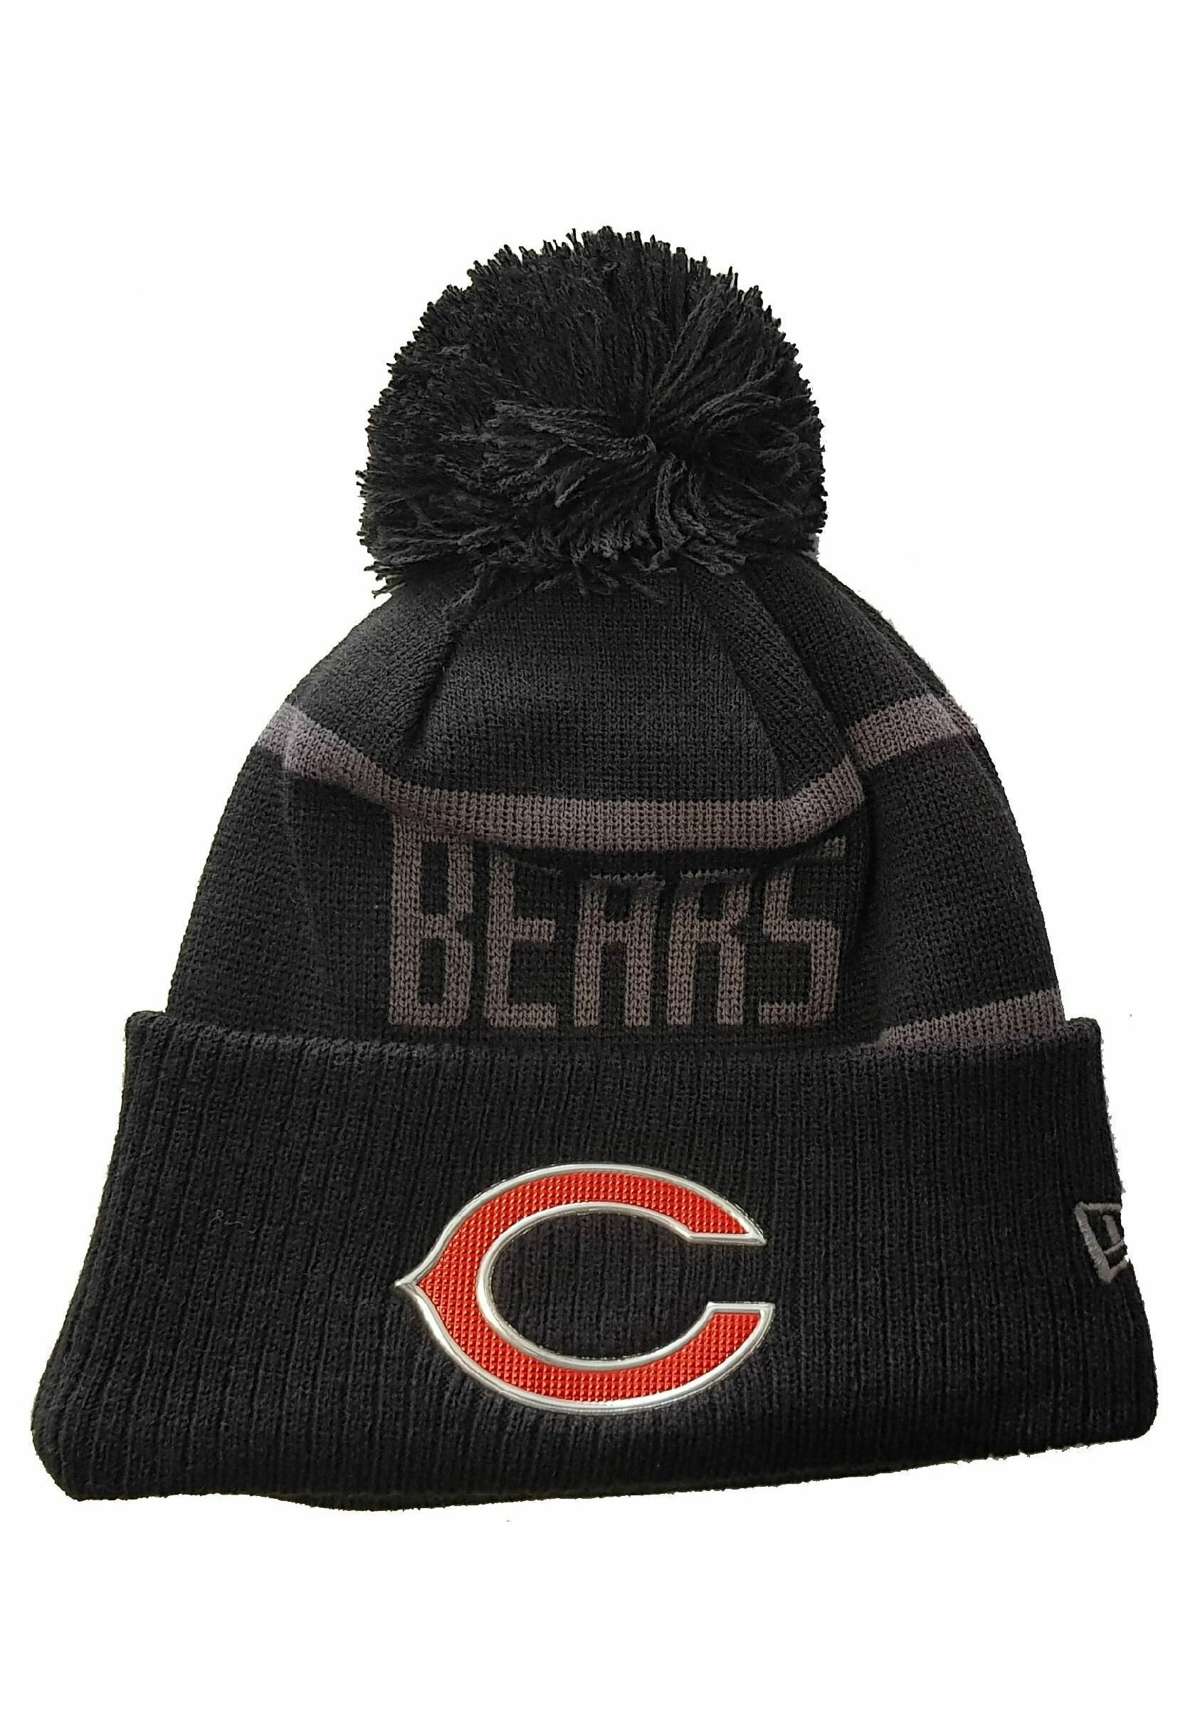 Шапка CHICAGO BEARS NFL 2017 COLLECTION